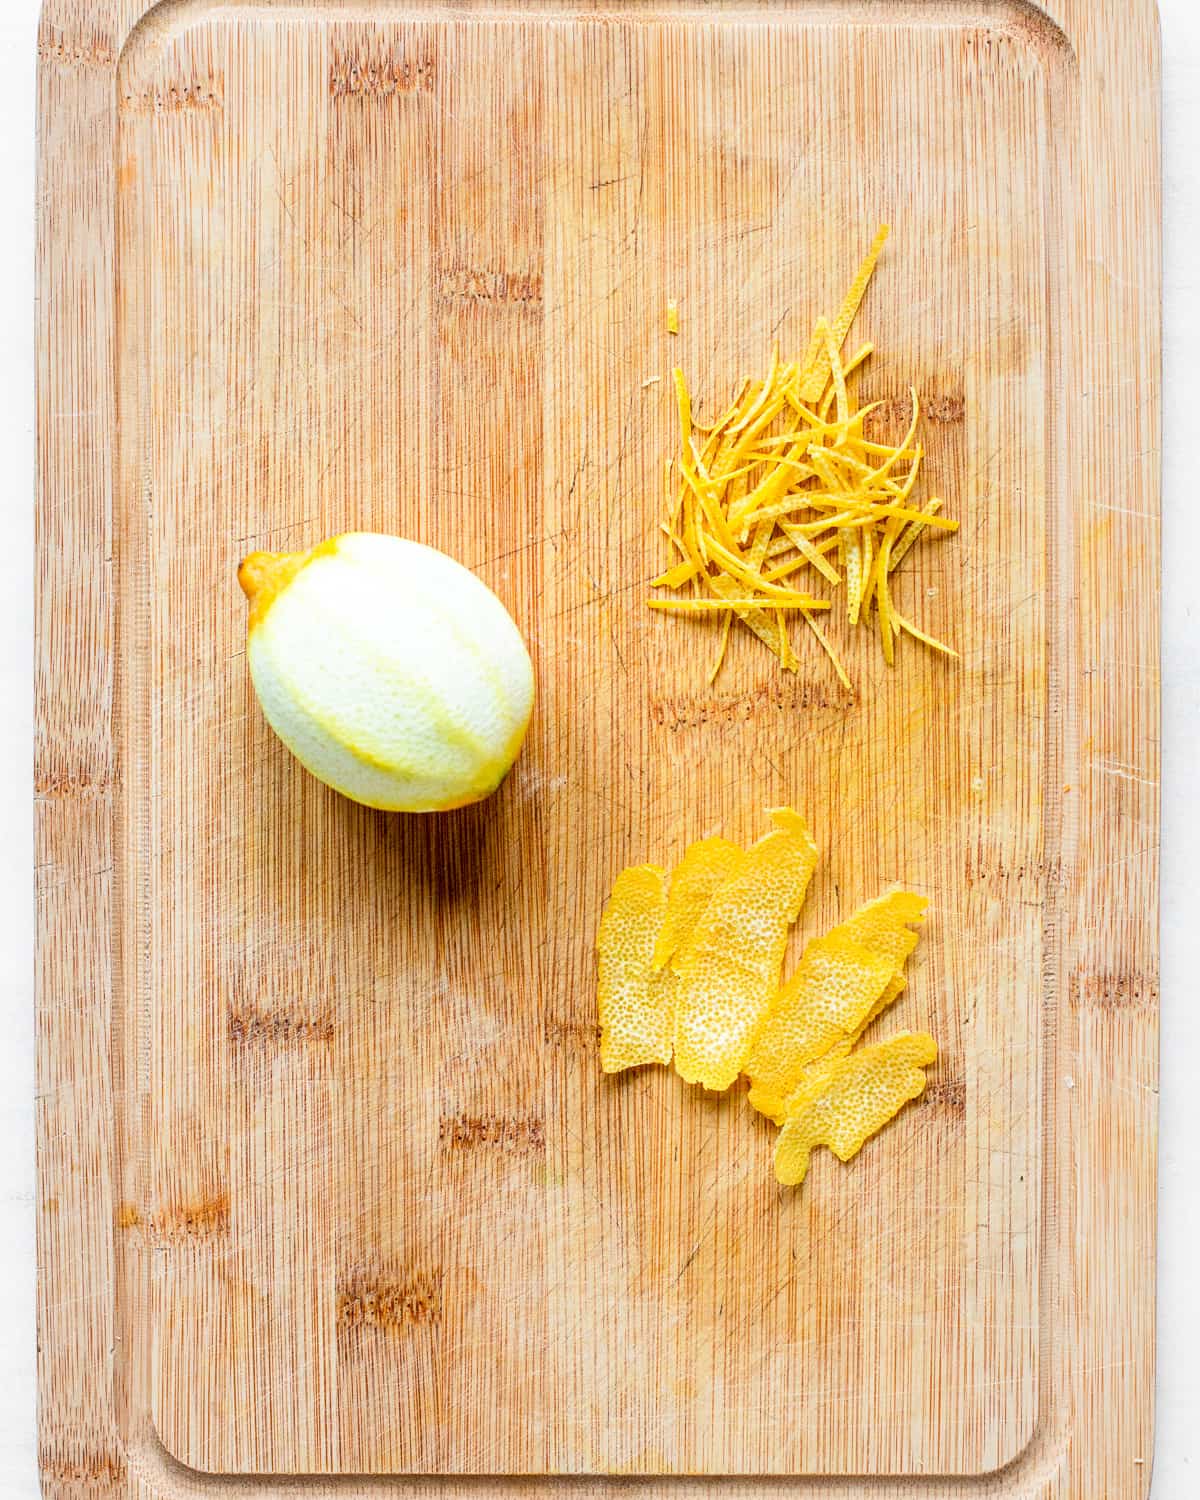 Zested lemon and lemon strips on a wooden cutting board.